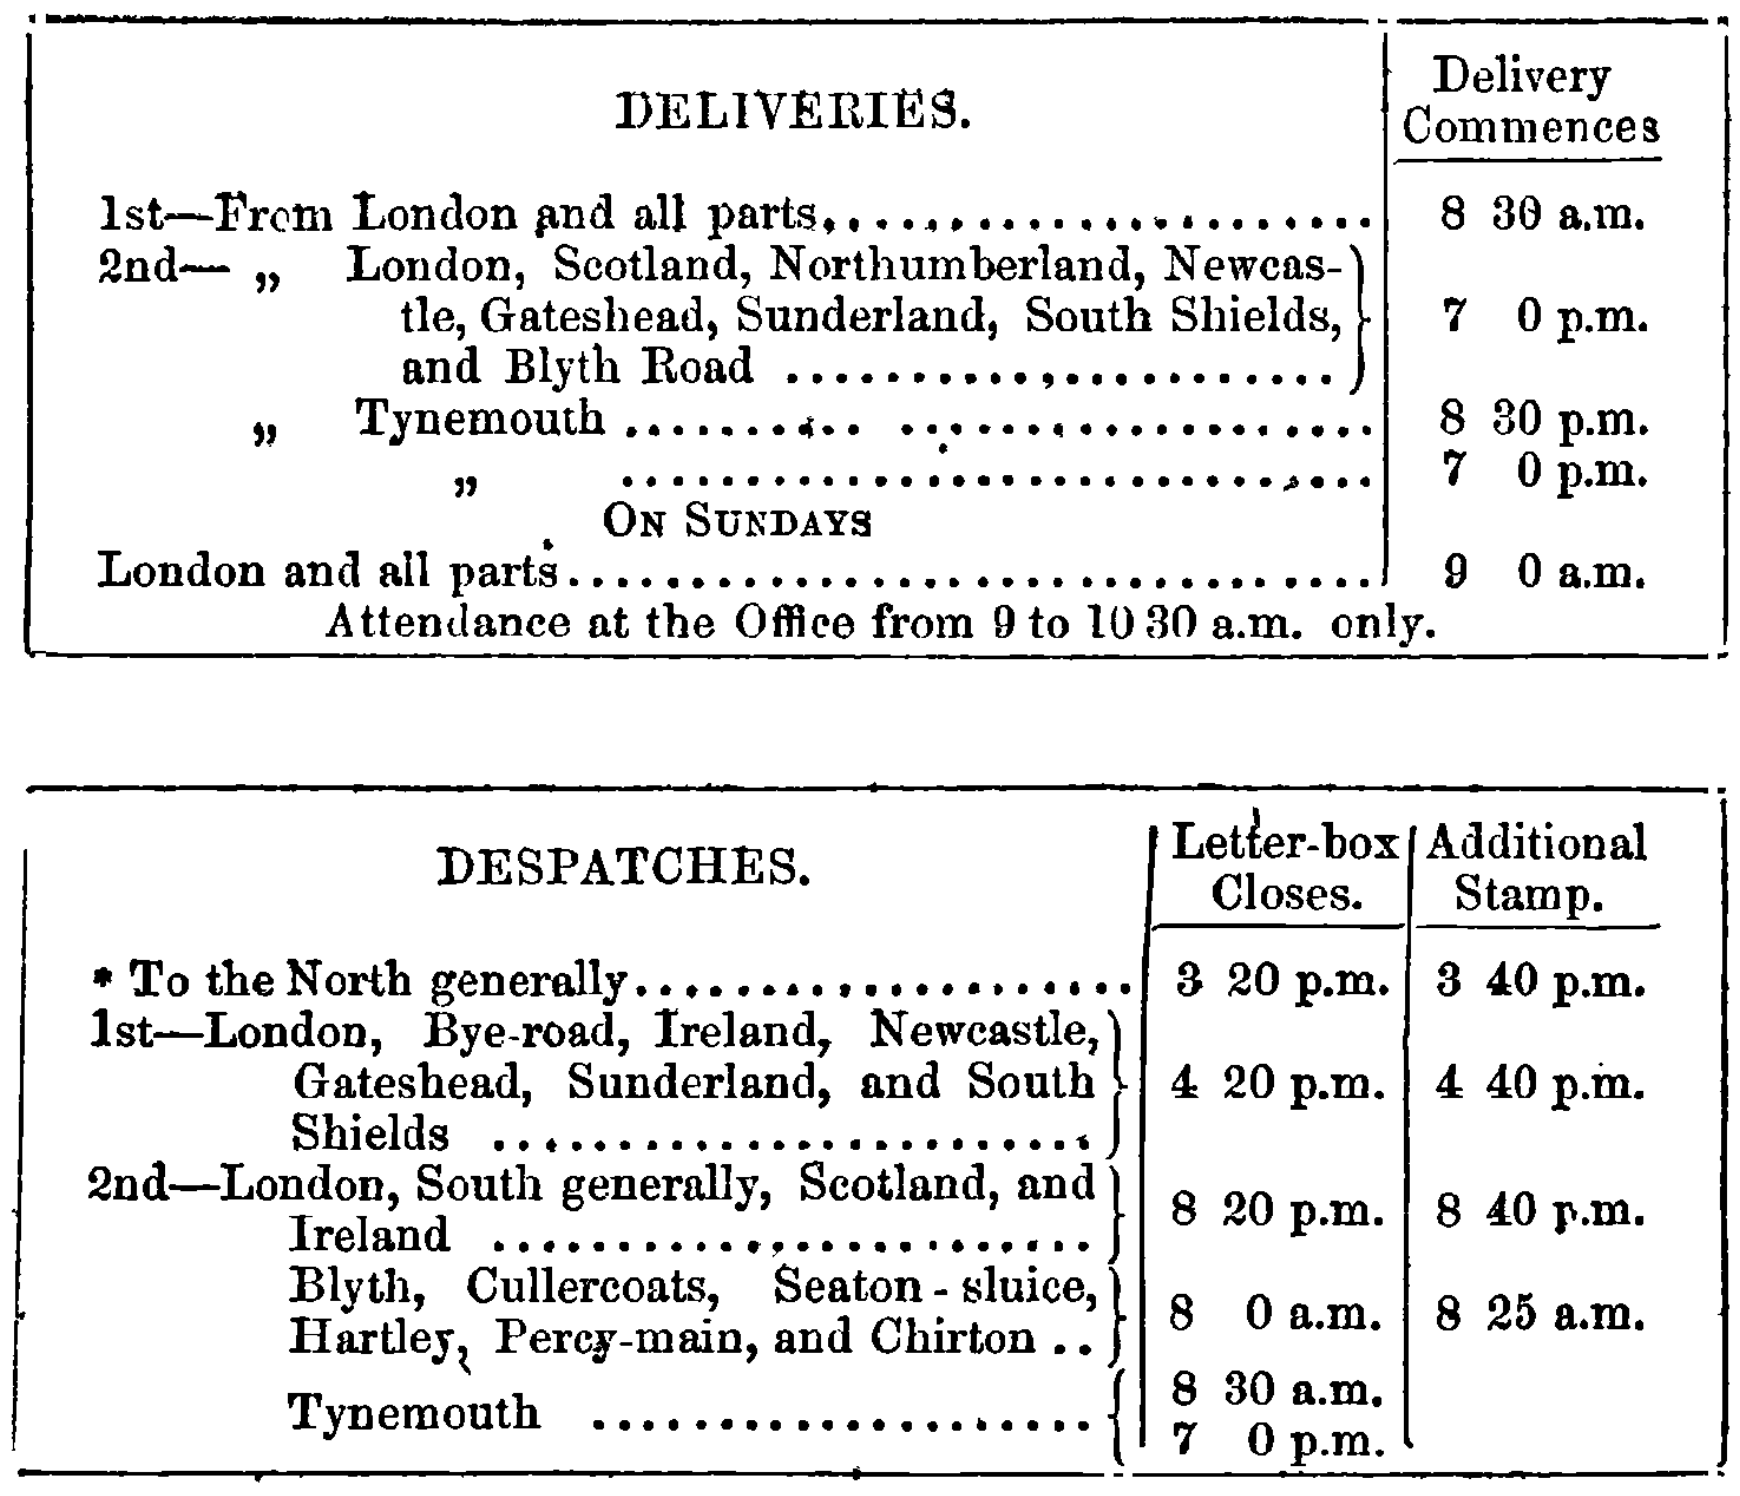 Image showing postoffice times for dispatches and deliveries